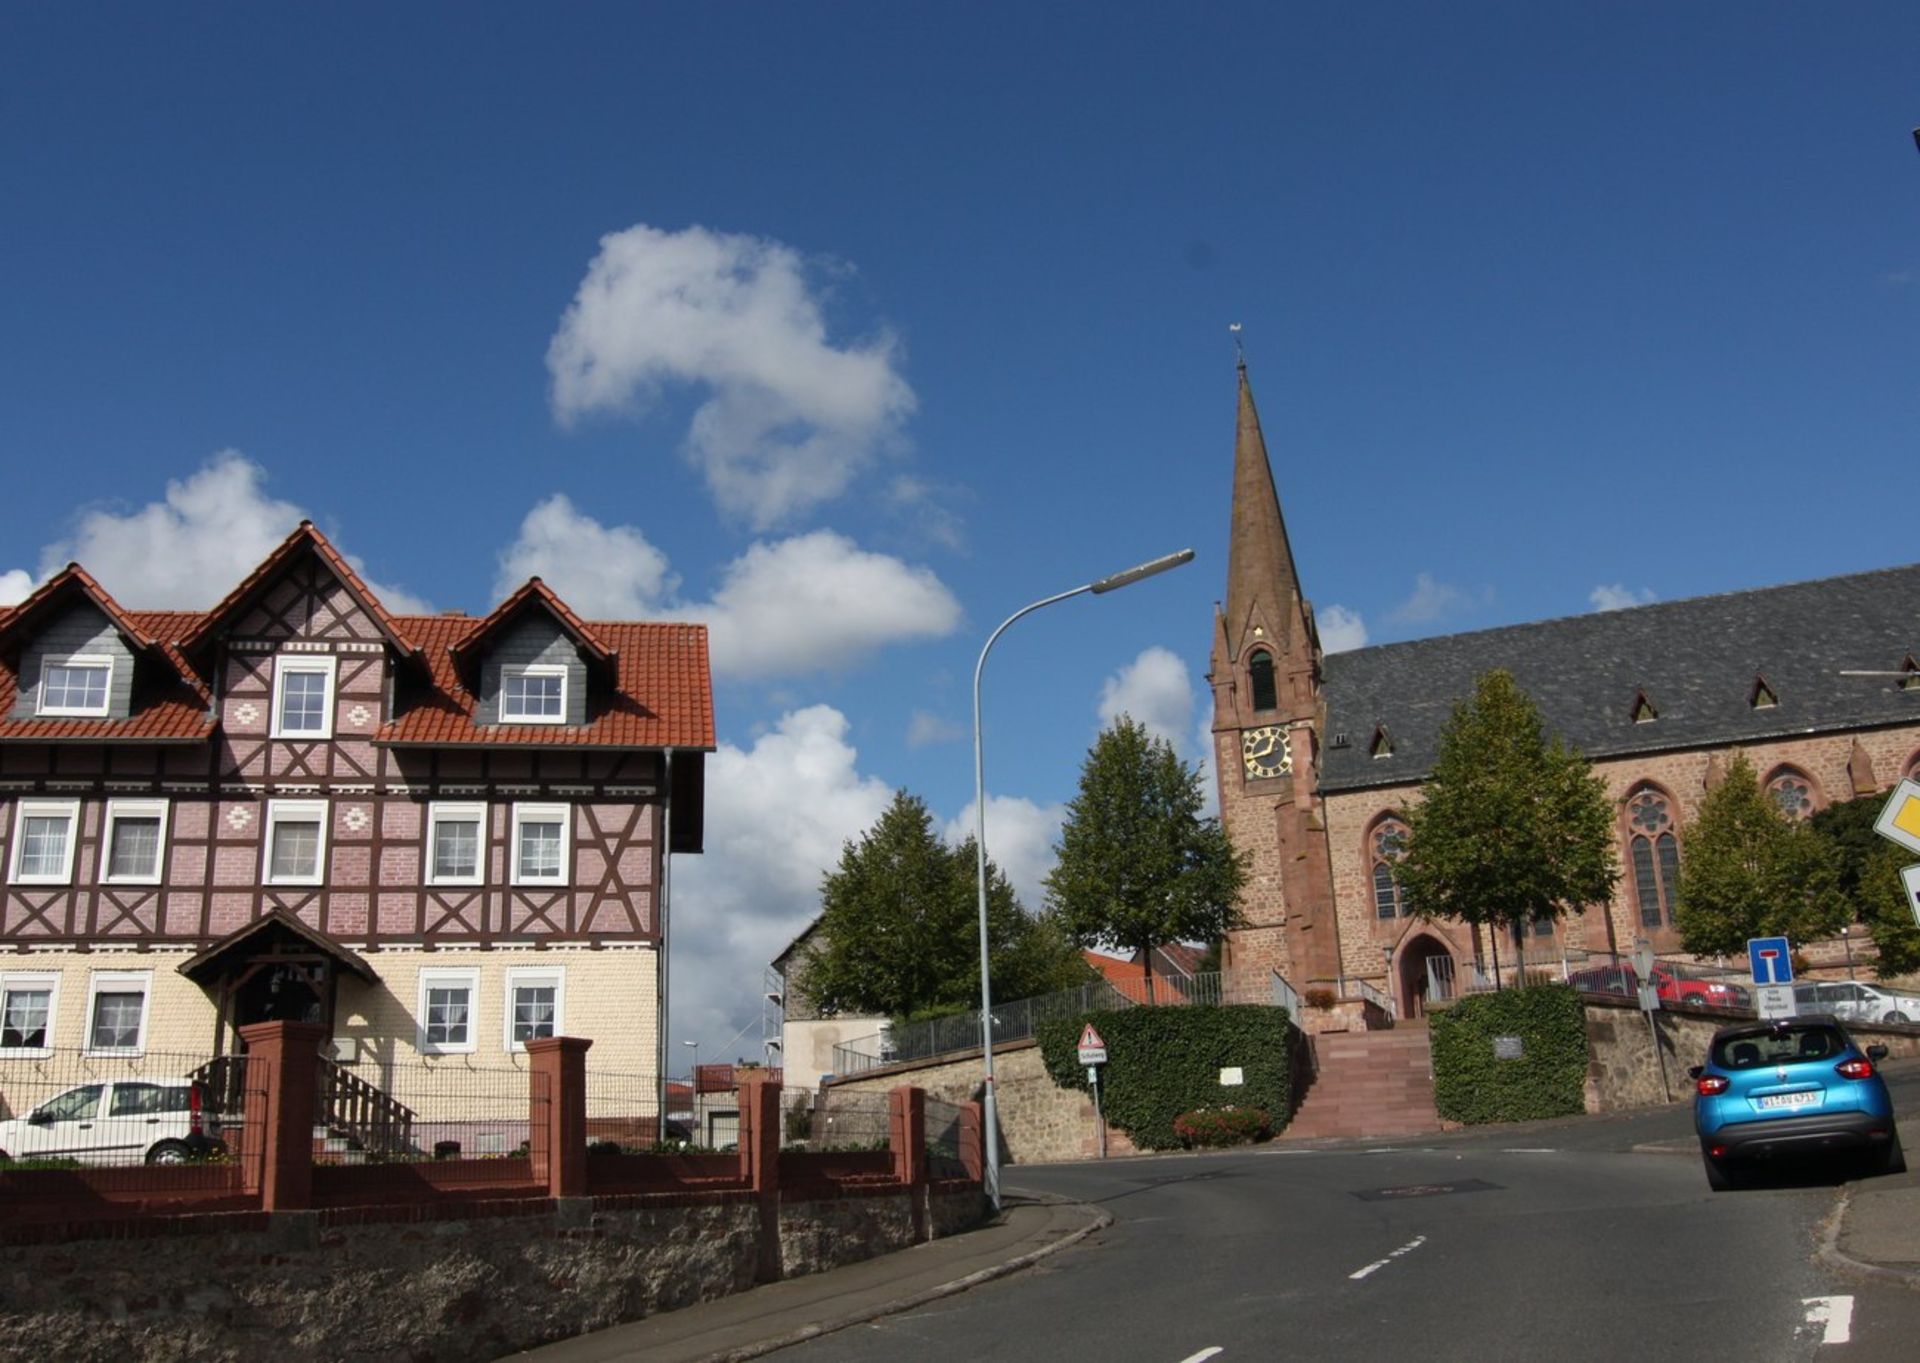 LOVELY LARGE HOUSE IN A VILLAGE CALLED MOMBERG, GERMANY - READY TO MOVE IN TO! - Image 57 of 66